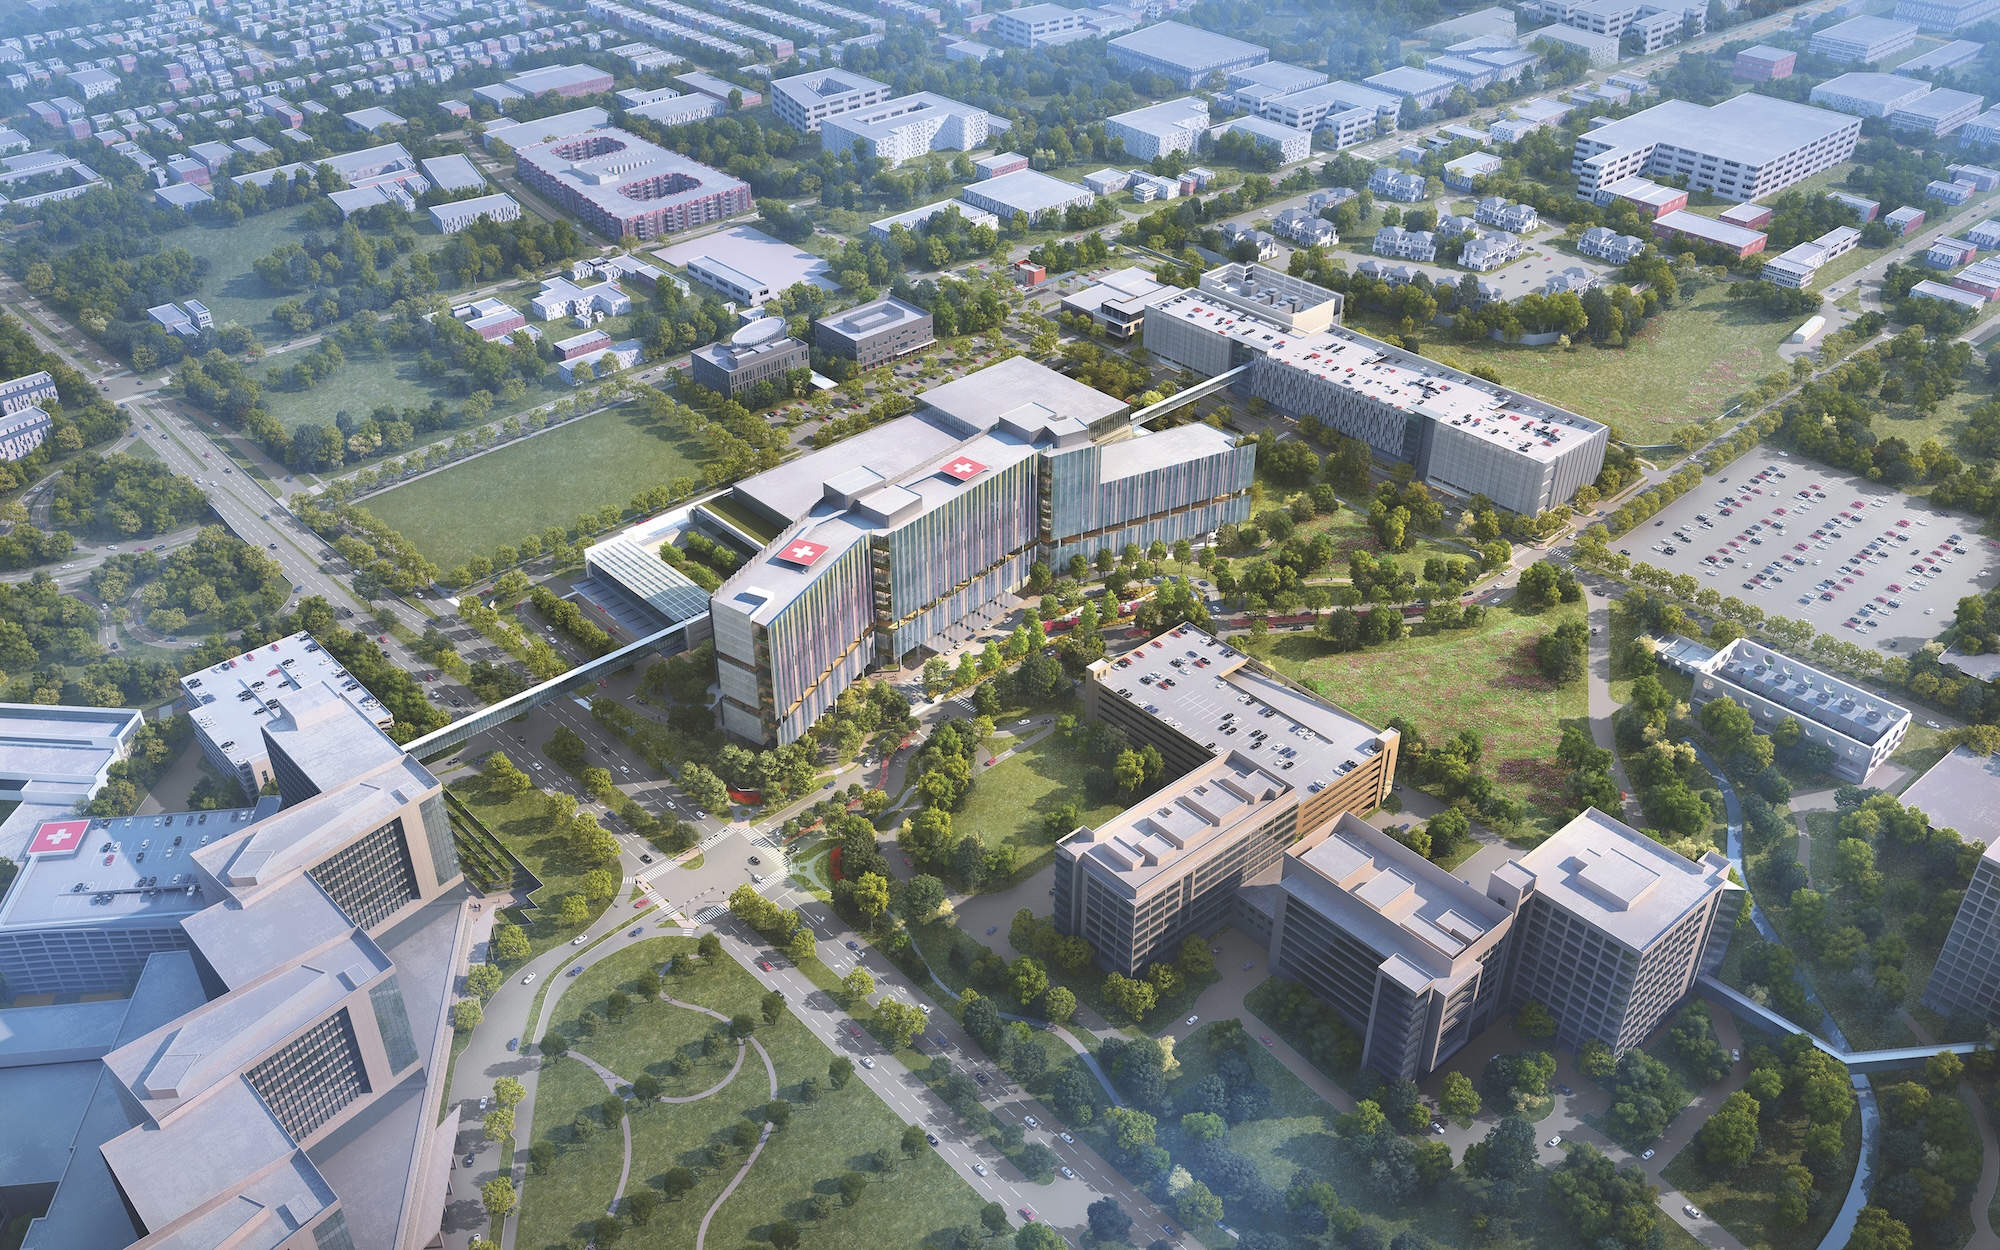 The size and breadth of the $5 billion, 4.5-million-sf pediatric campus in Dallas, for Children’s Health and UT Southwestern Medical Center, are dictated, in part, by growth projections for the area’s children’s population.